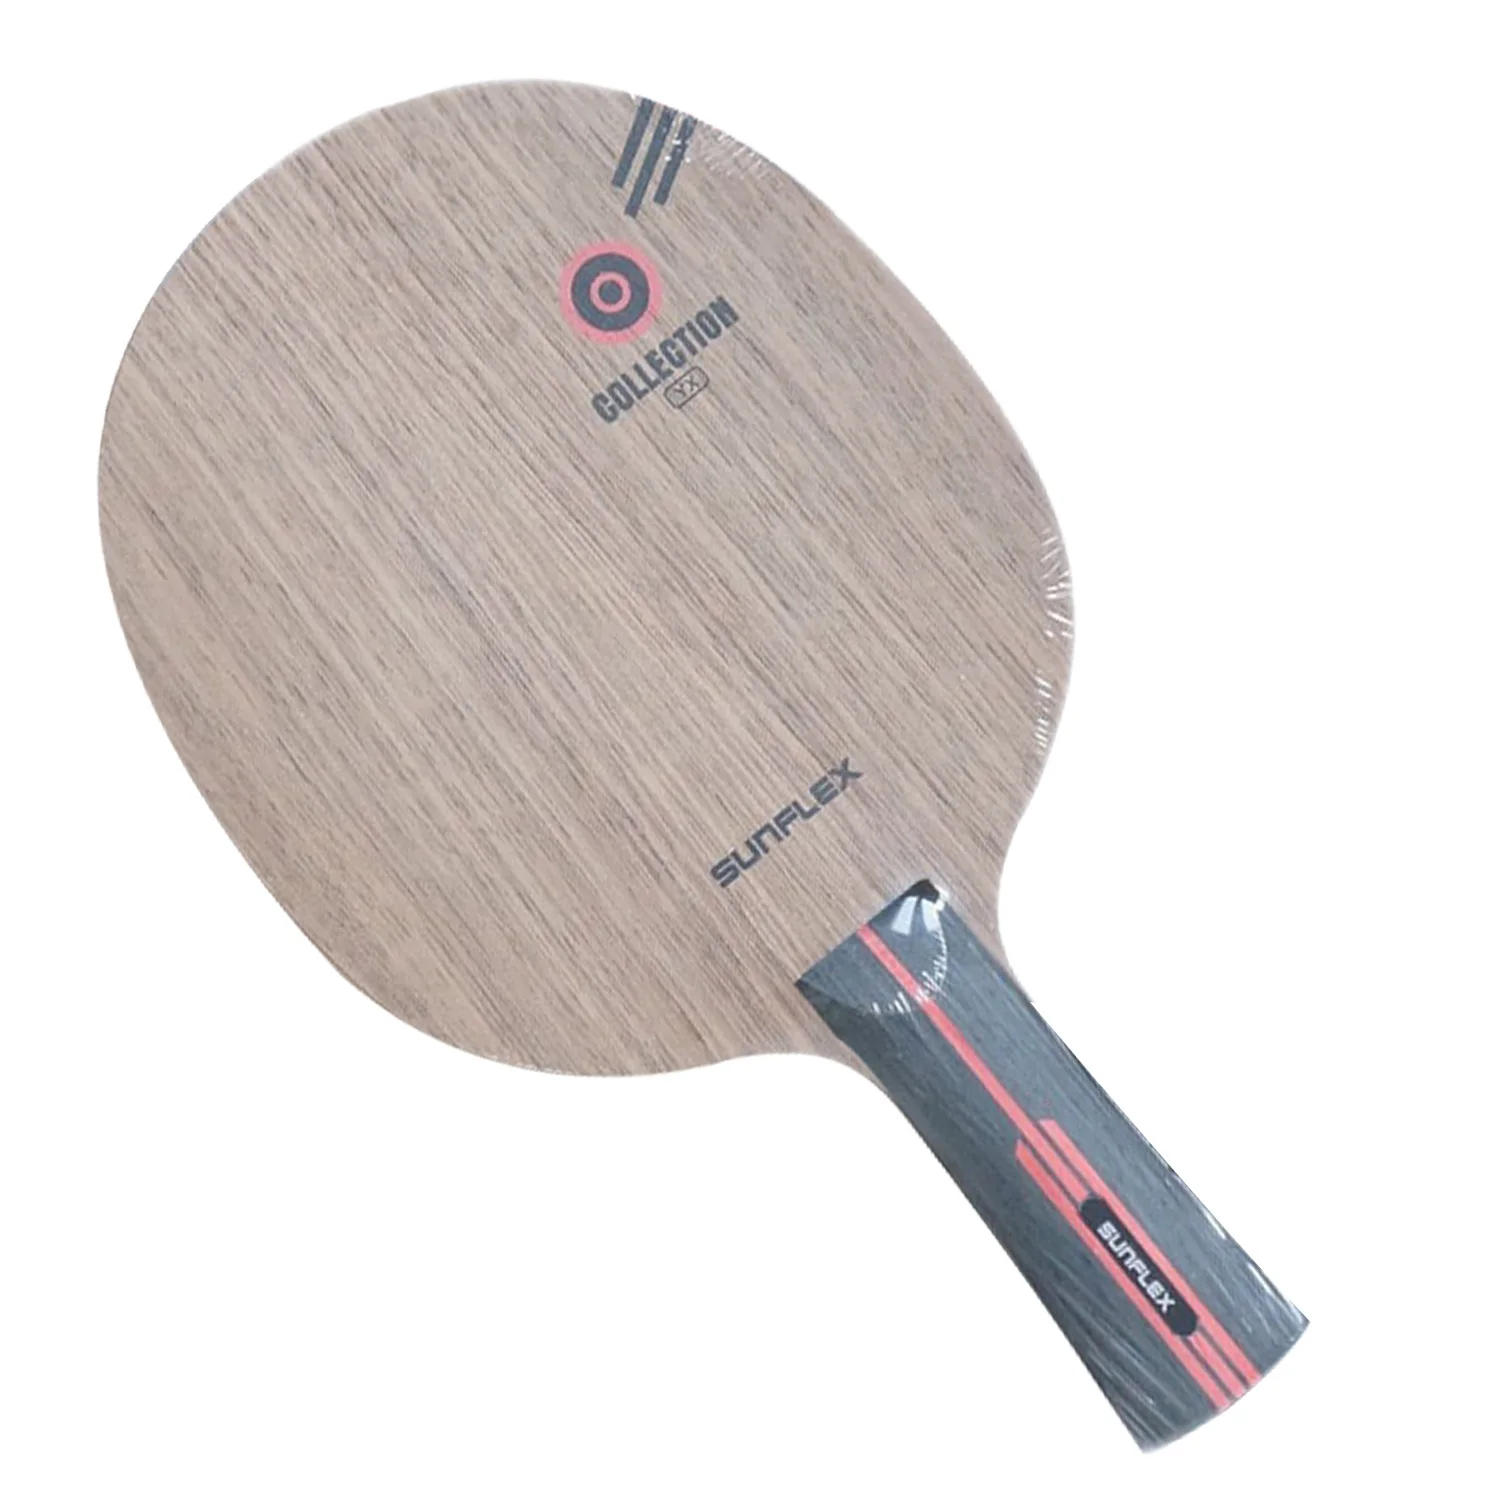 SUNFLEX COLLECTION YX Table Tennis Blade 5 Ply pure Wood Racket Ping Pong Bat Tenis De Mesa Paddle